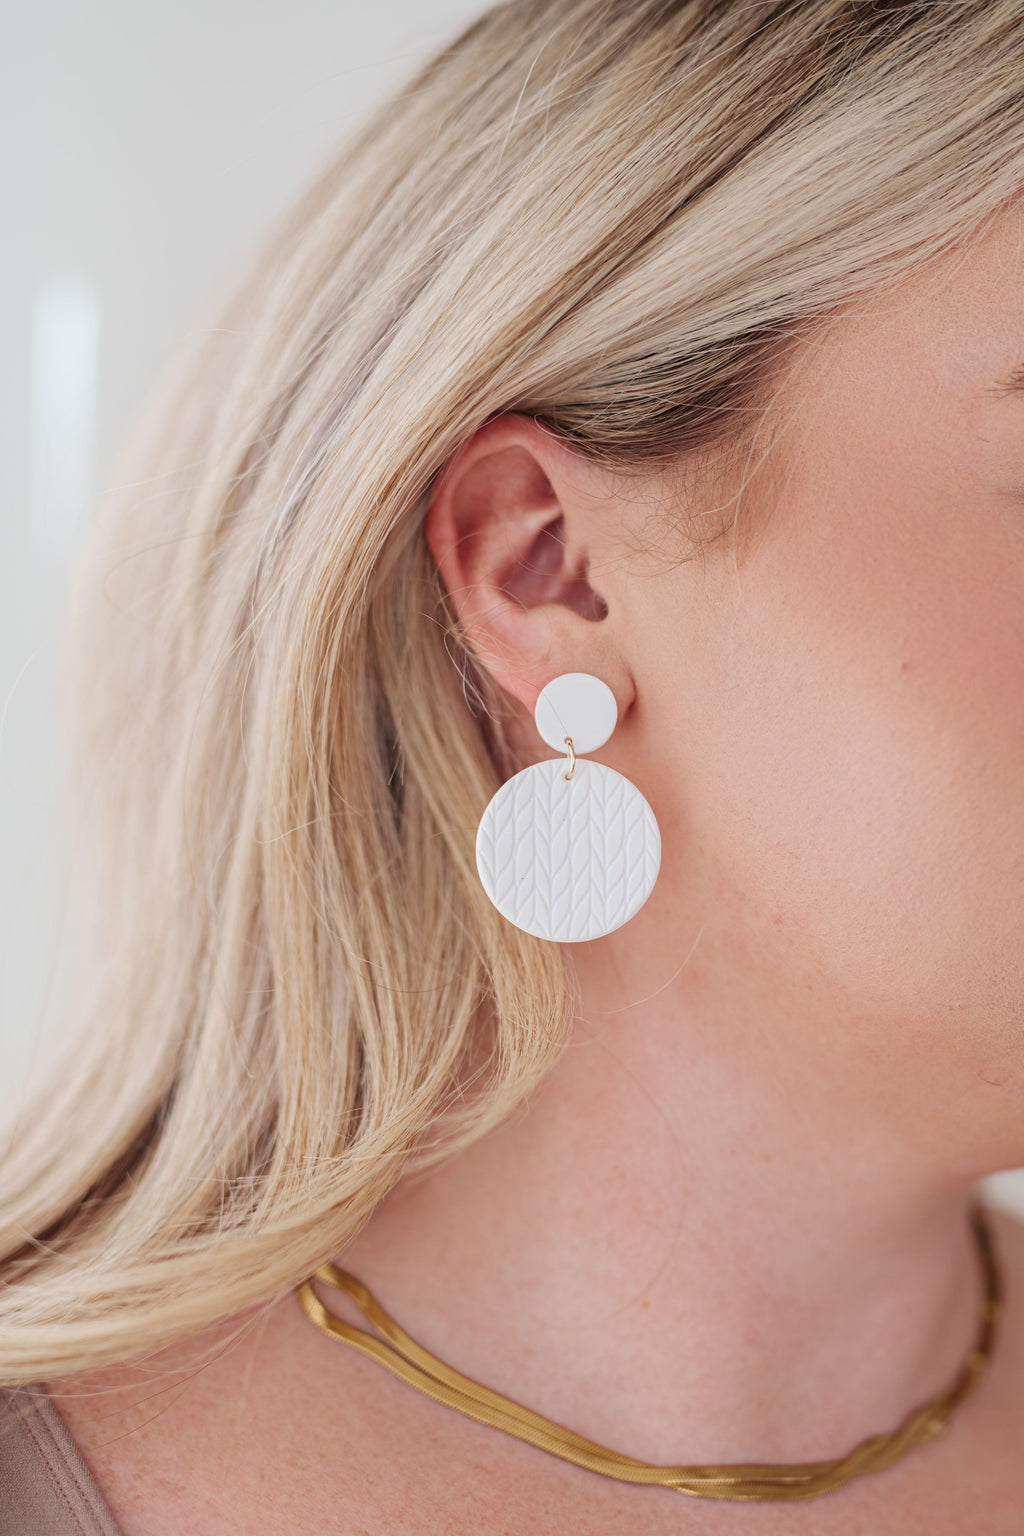 Around And Back To You Earrings in Cream